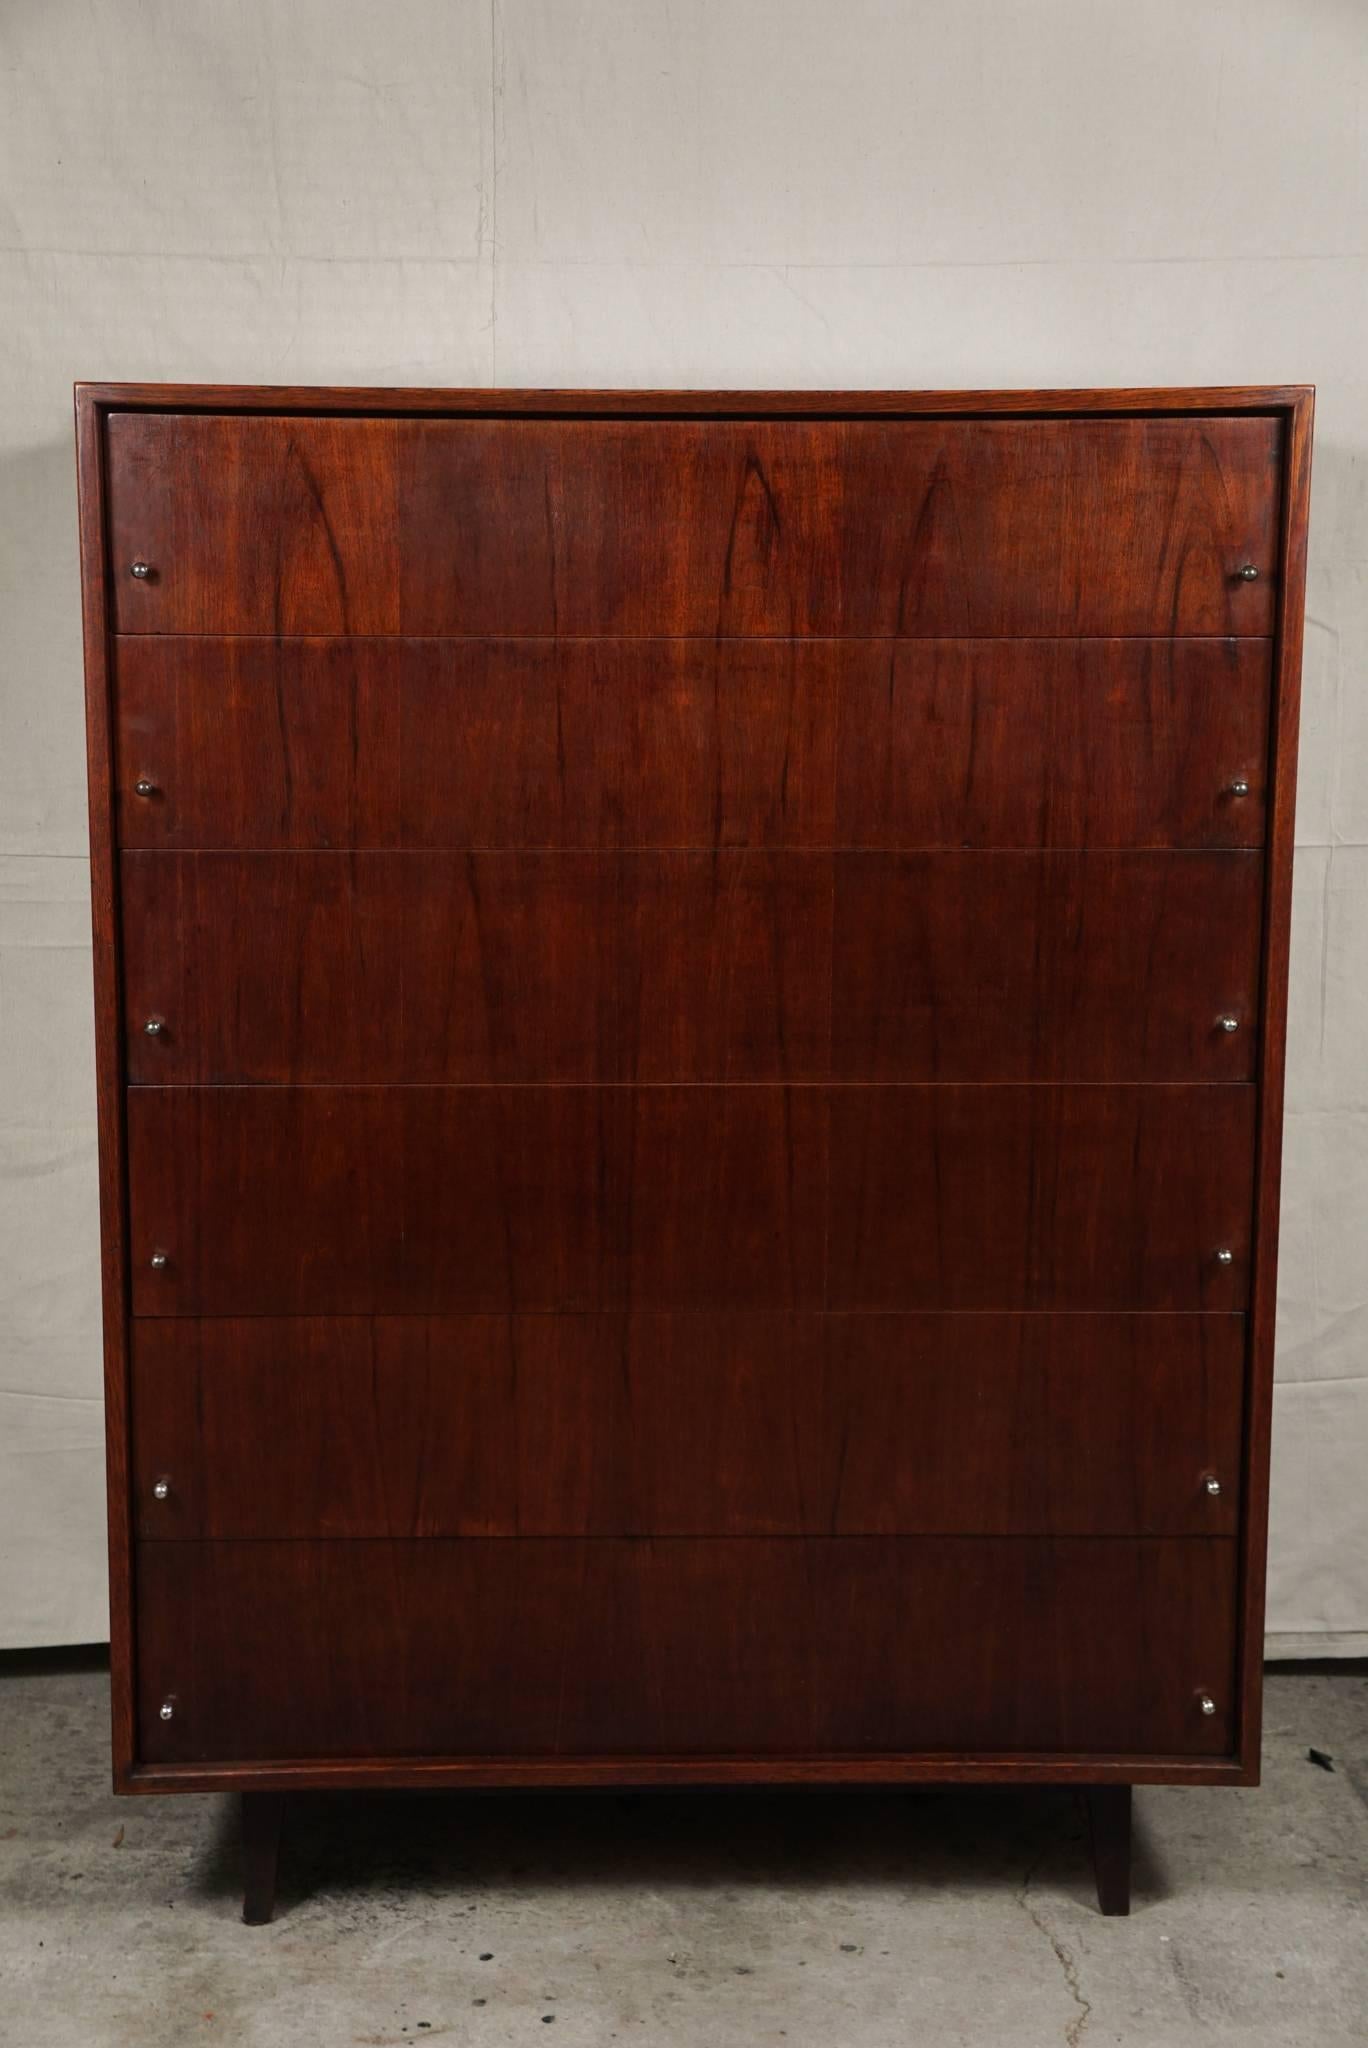 This beautiful and simple tall chest housing six large drawers was made in America in the late 1950s. Constructed of a dark rich walnut veneer chosen to highlight the long grains and growth patterns of the wood down the entire length of the chests